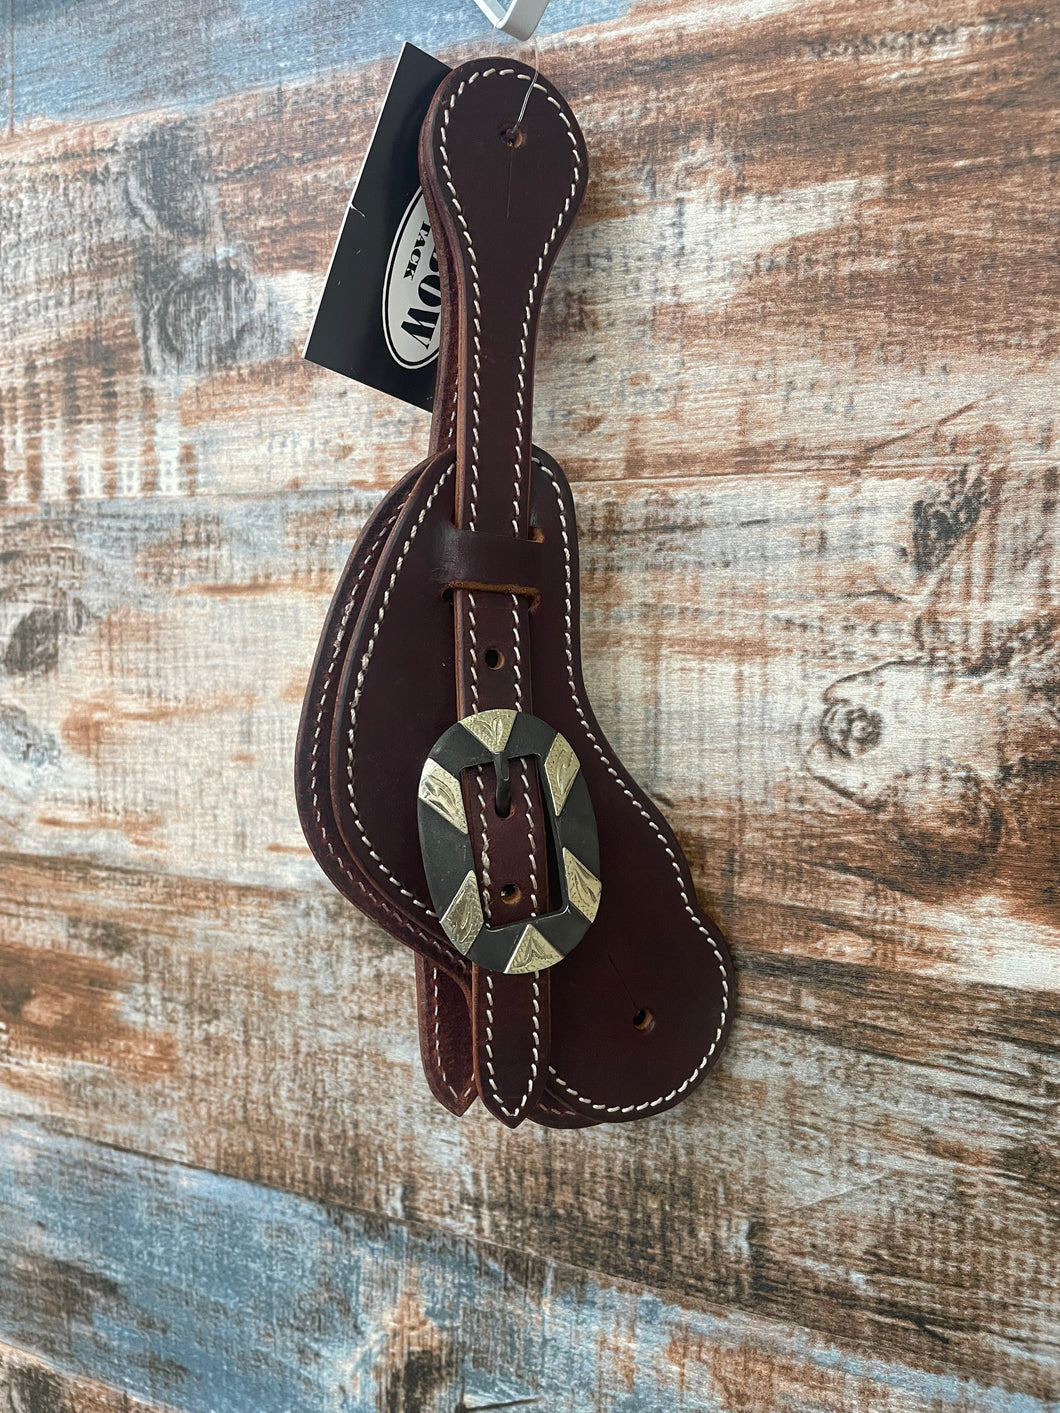 Oxbow Spur Strap with Buckle